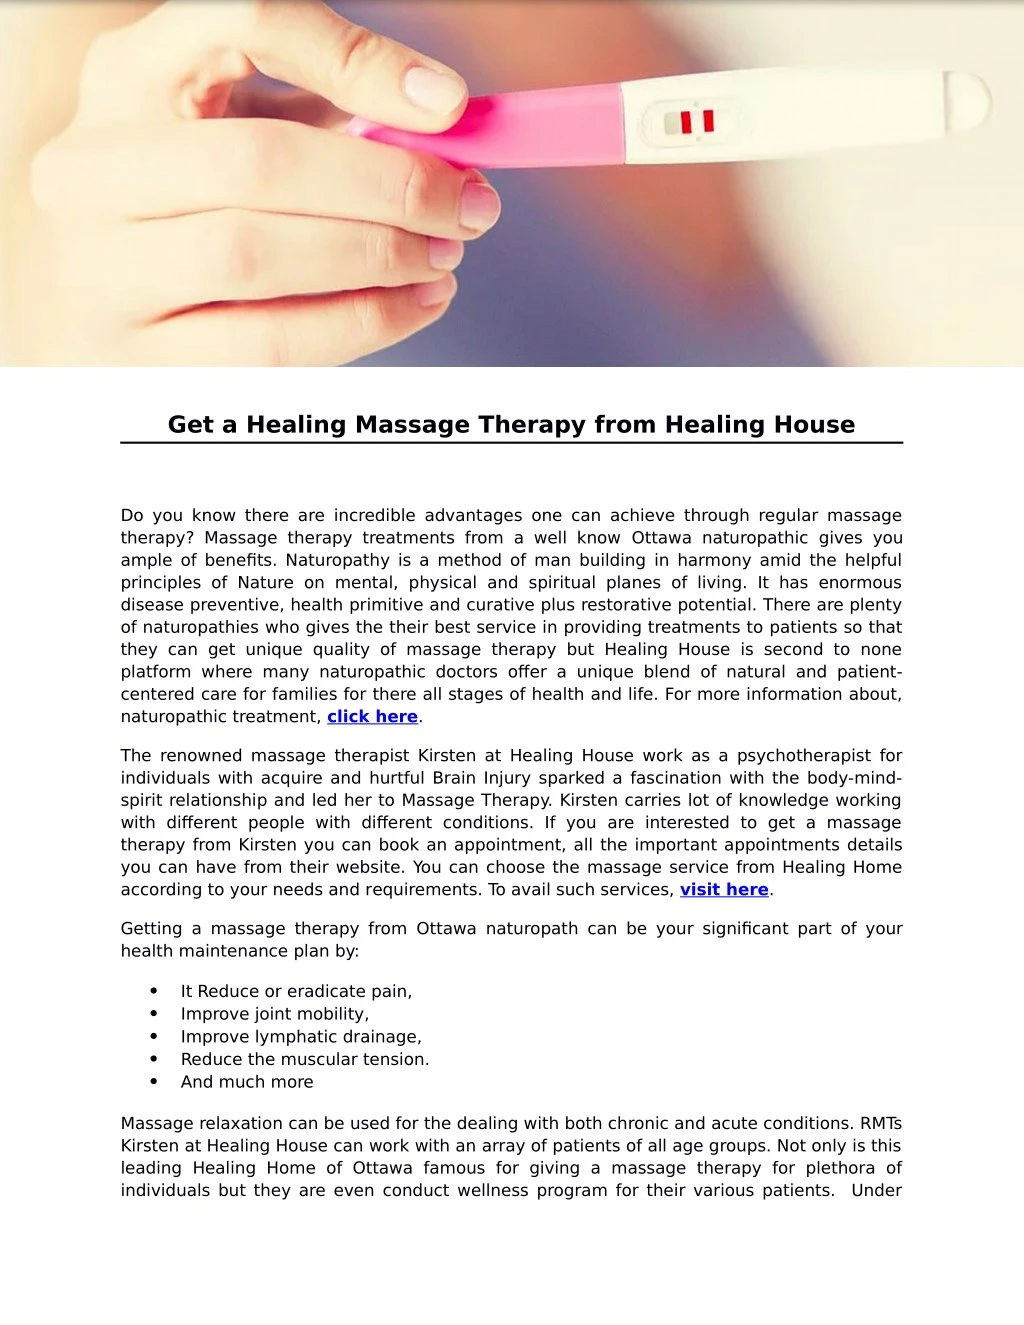 get a healing massage therapy from healing house